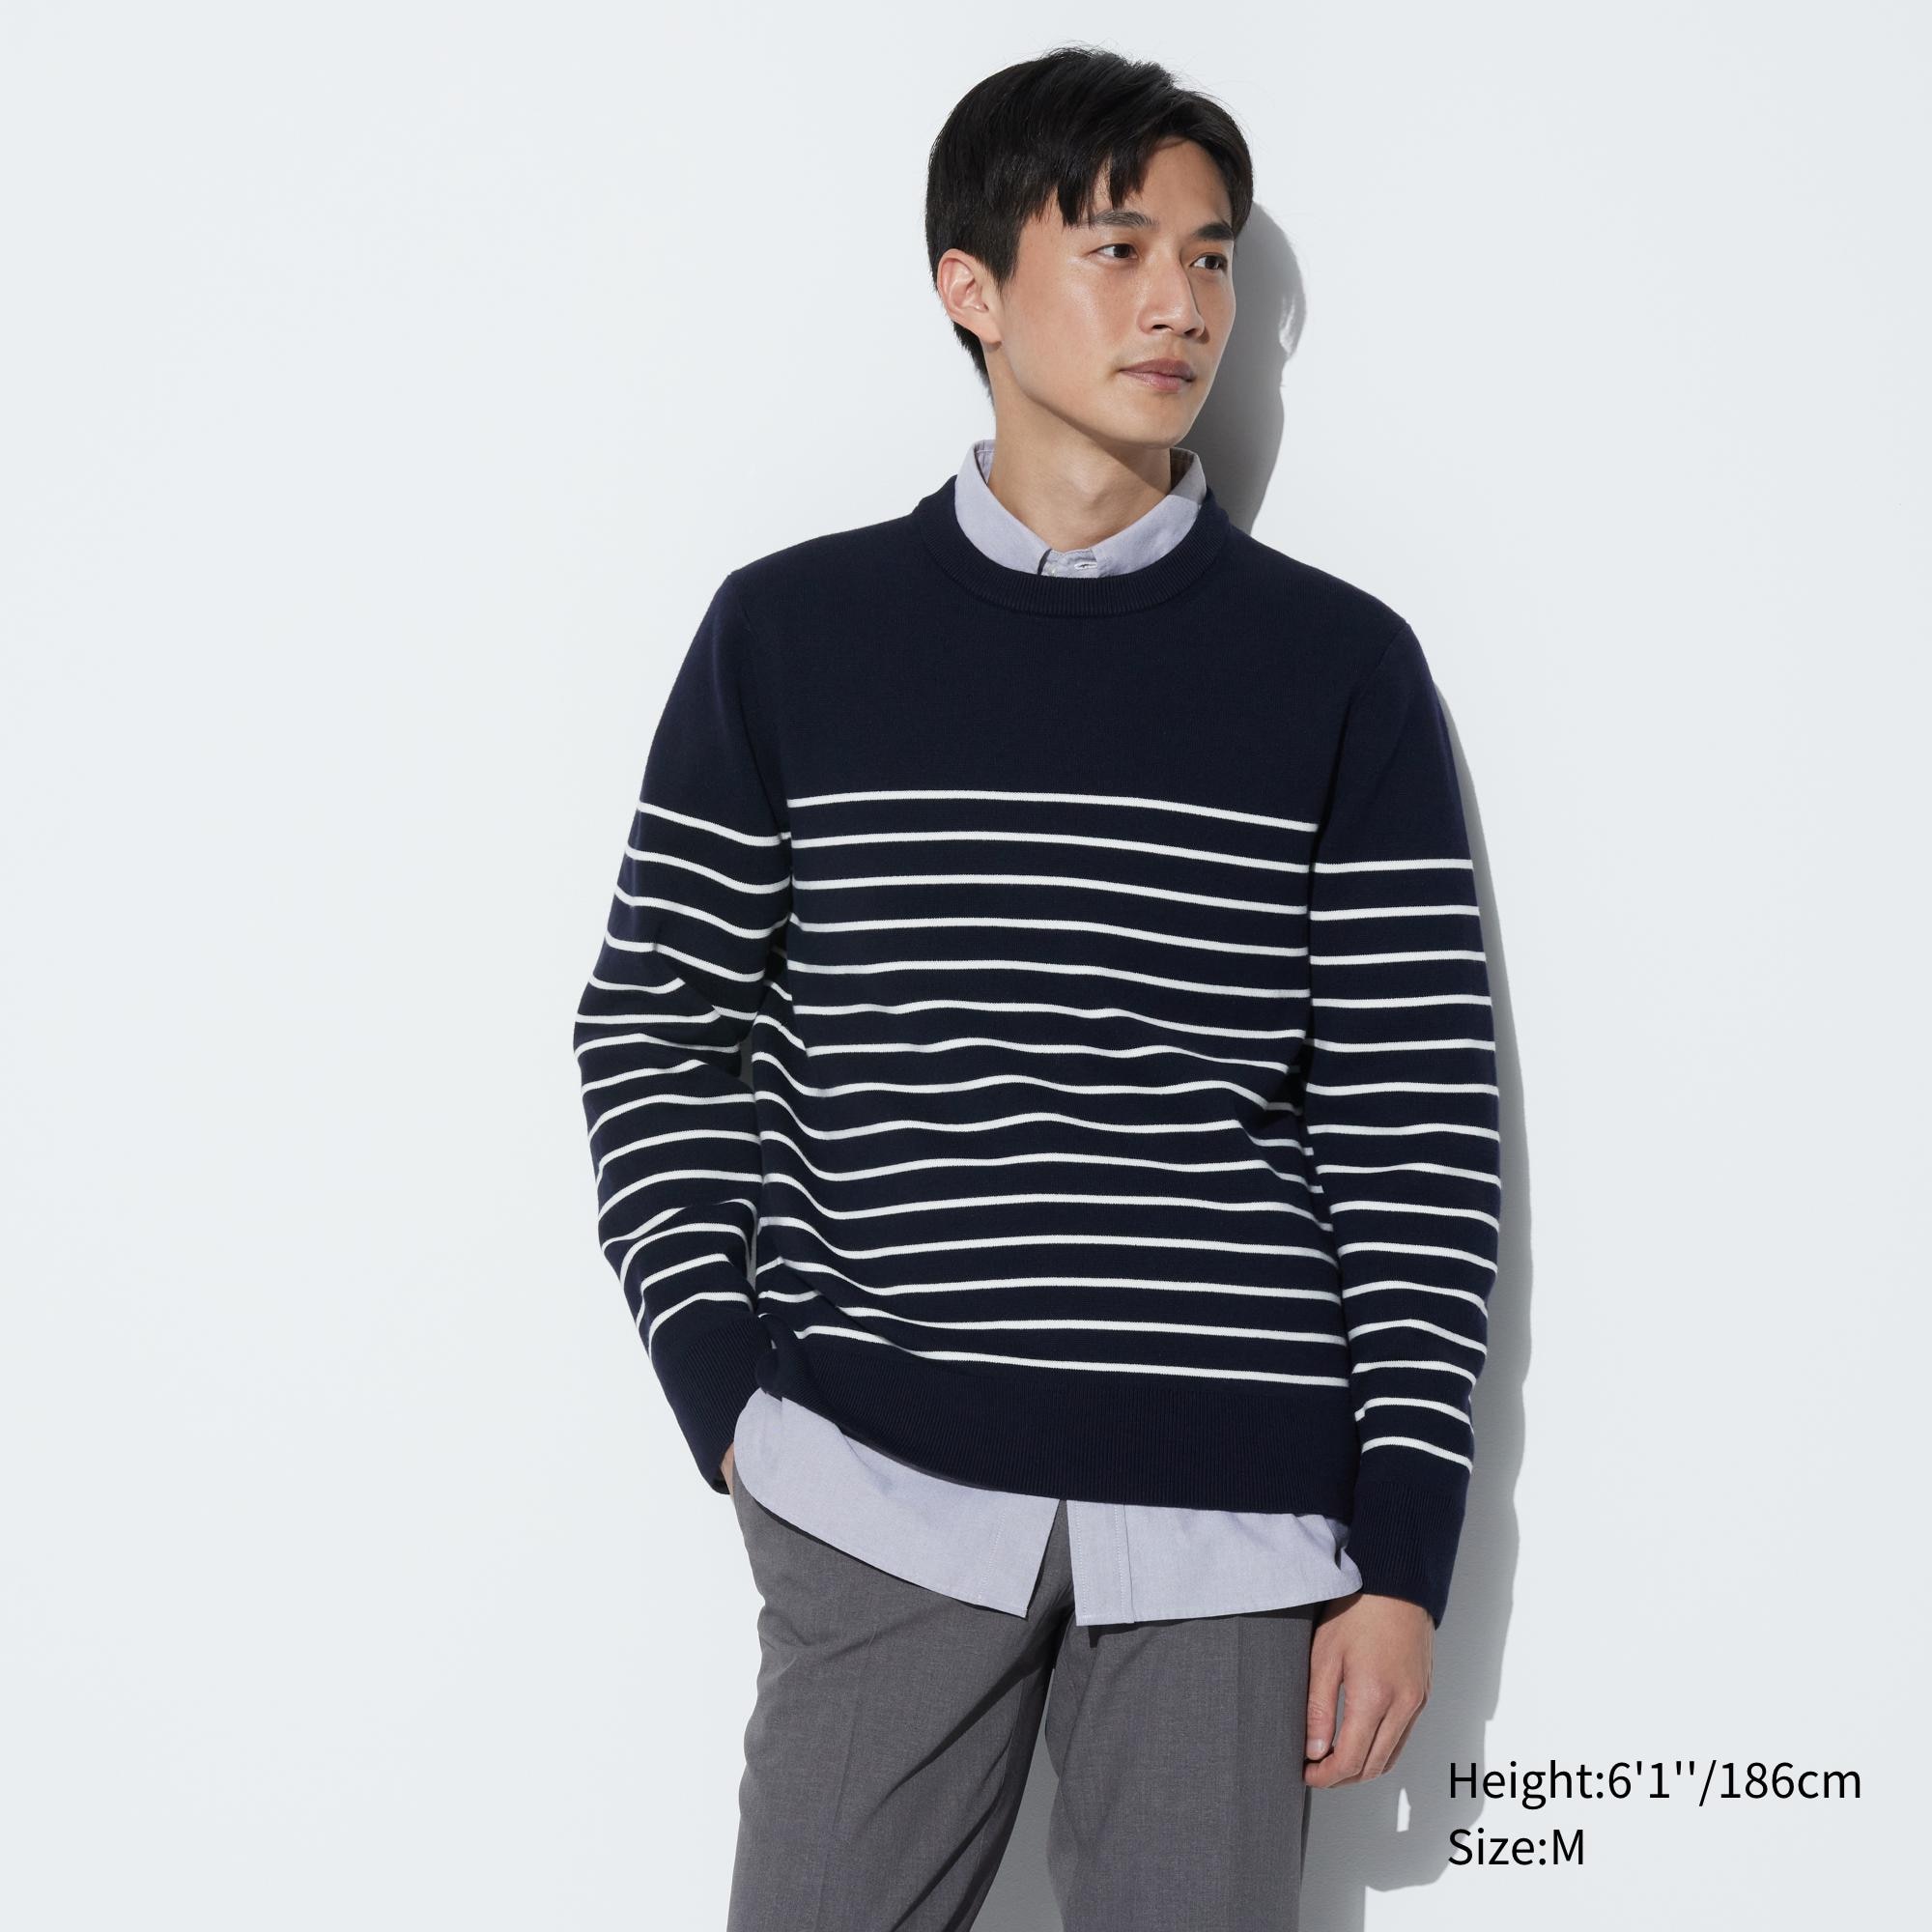 Men's knitted jumpers, cardigans & sweaters | UNIQLO UK